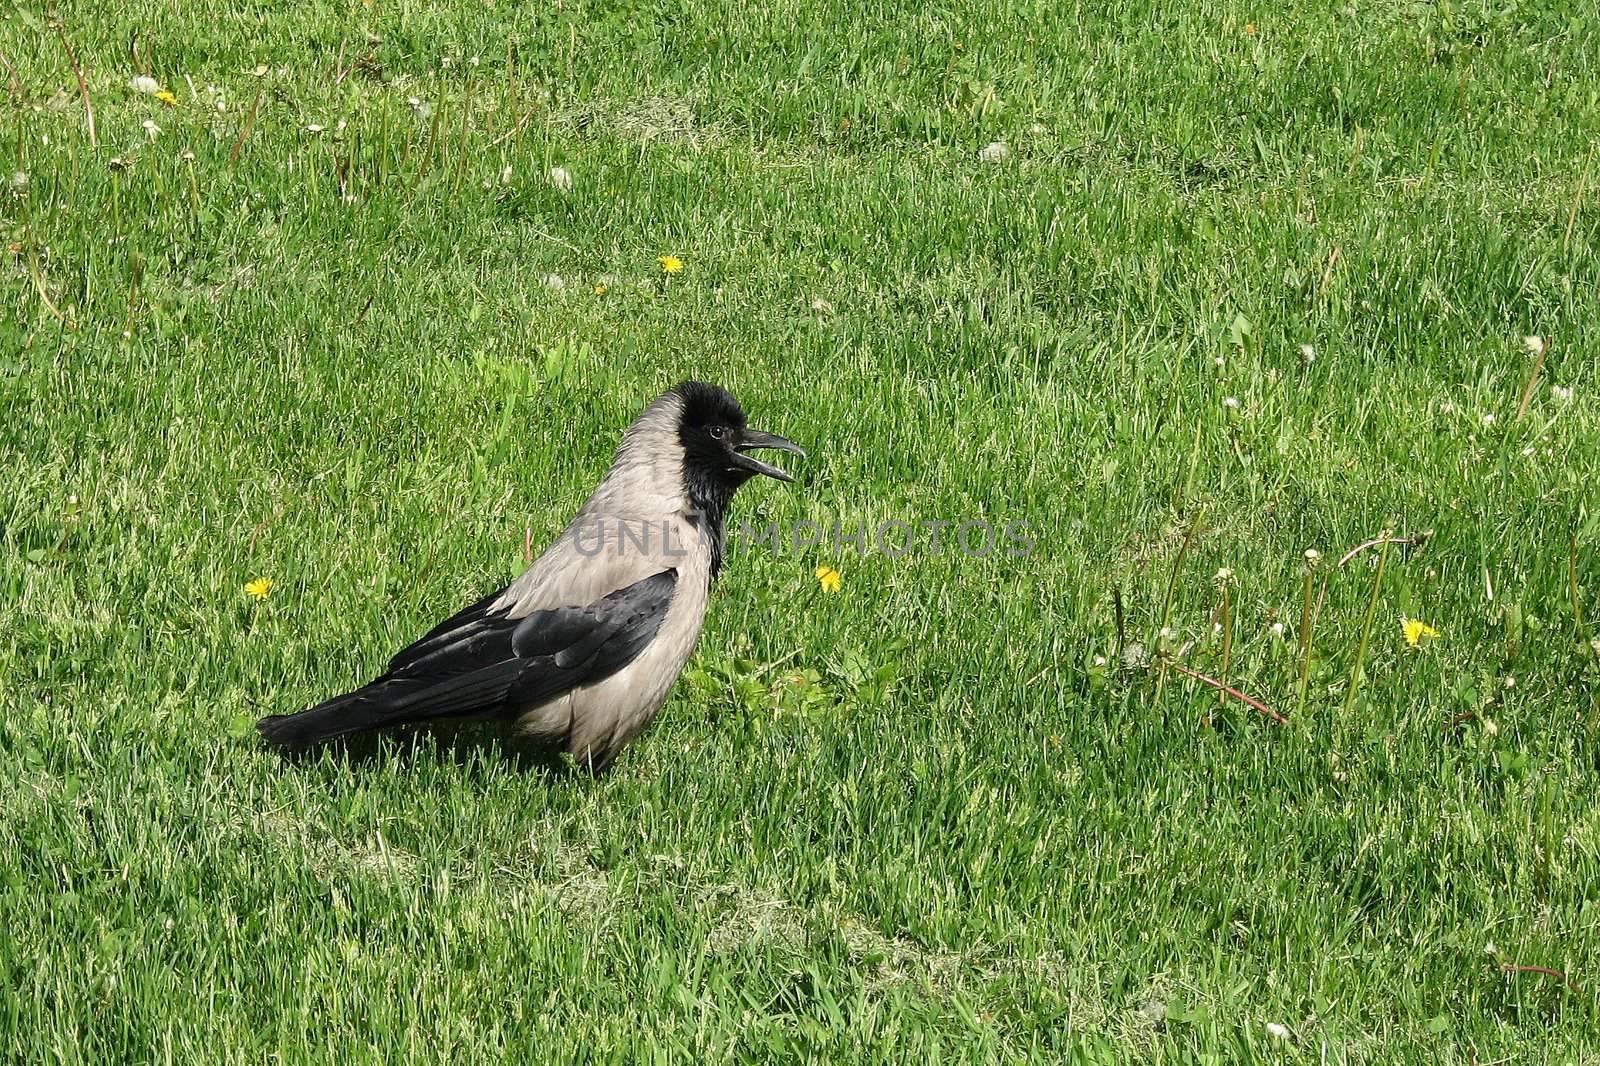 The young crow staying on a green lawn